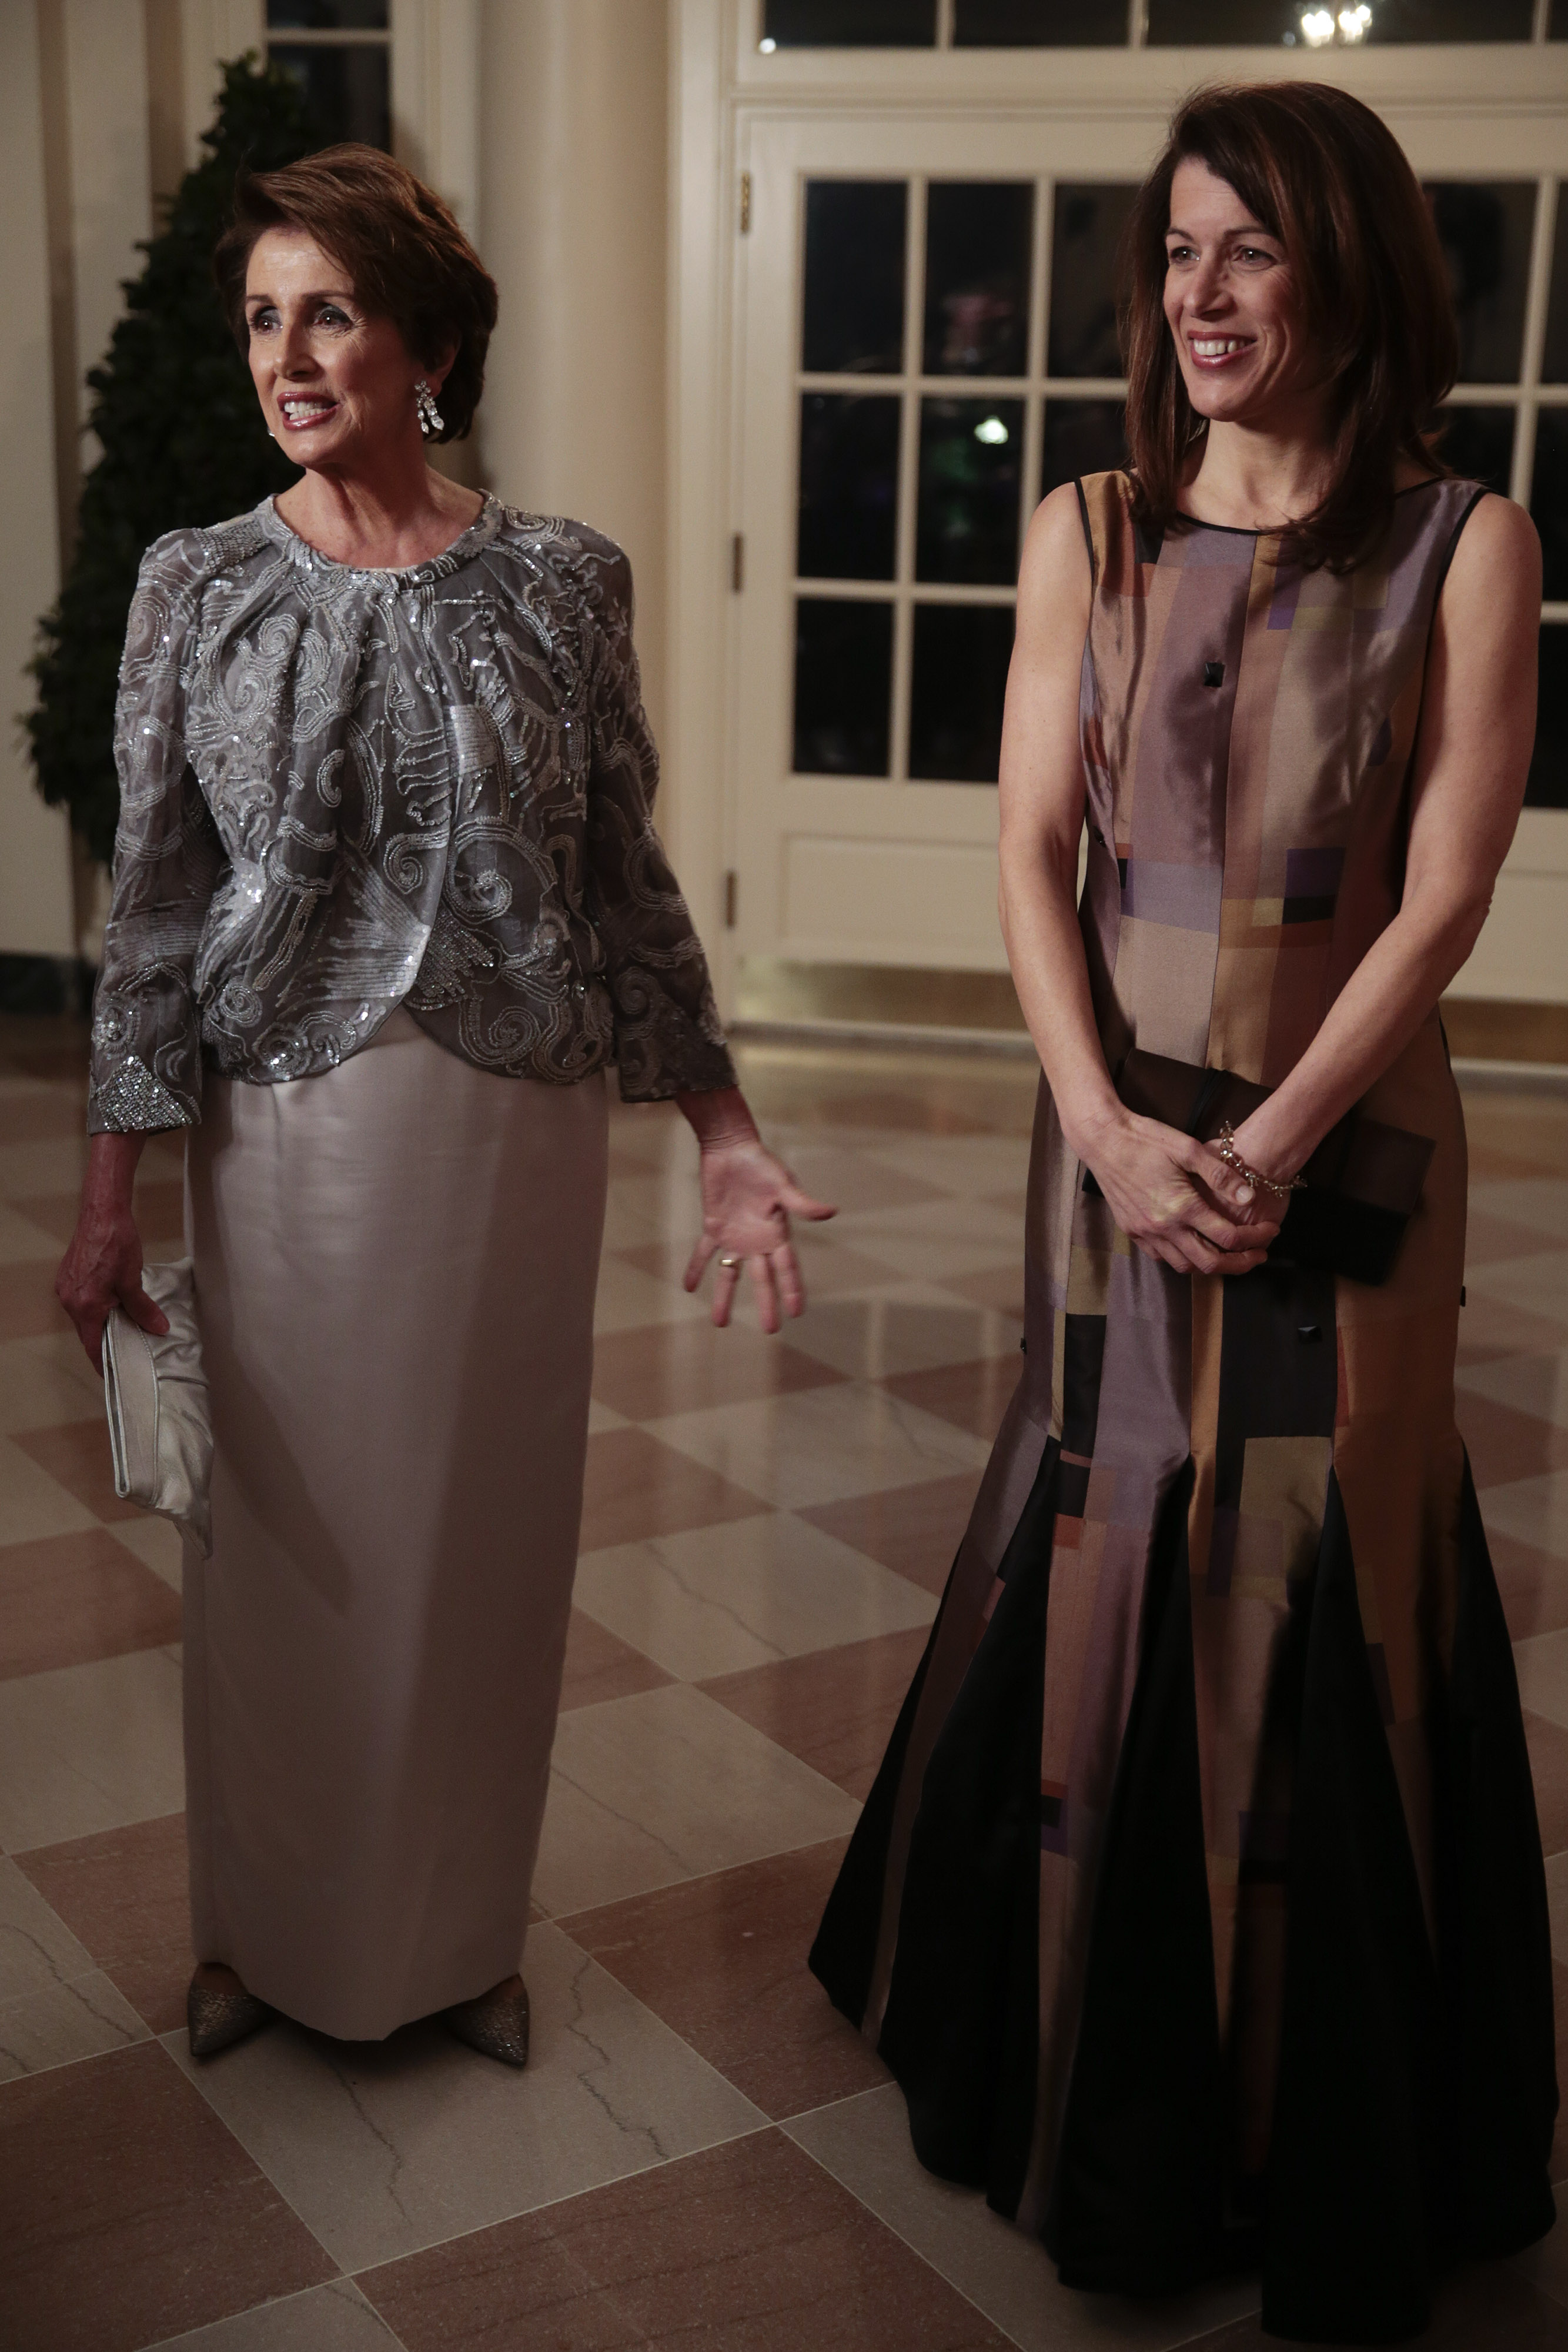 Nancy Pelosi and Jacqueline Kenneally at a state dinner hosted by U.S. President Barack Obama and U.S. first lady Michelle Obama in honor of French President Francois Hollande at the White House on February 11, 2014, in Washington, DC. | Source: Getty Images